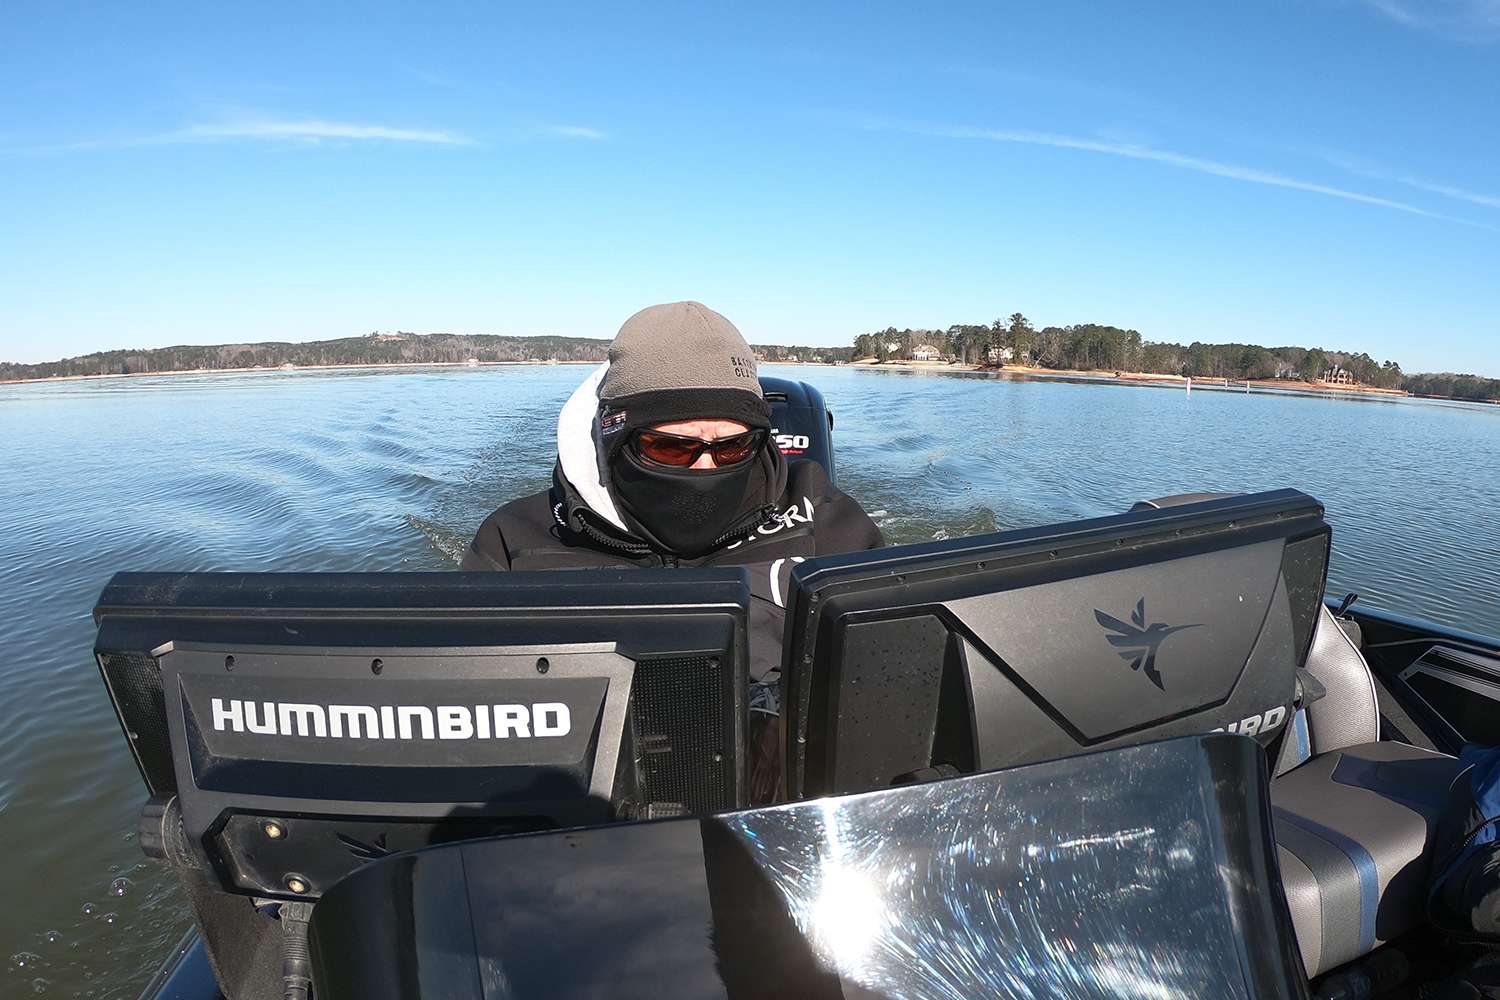 Herren spent a majority of his time staring at his dash-mounted Humminbirds. A key tool for success on this lake. 